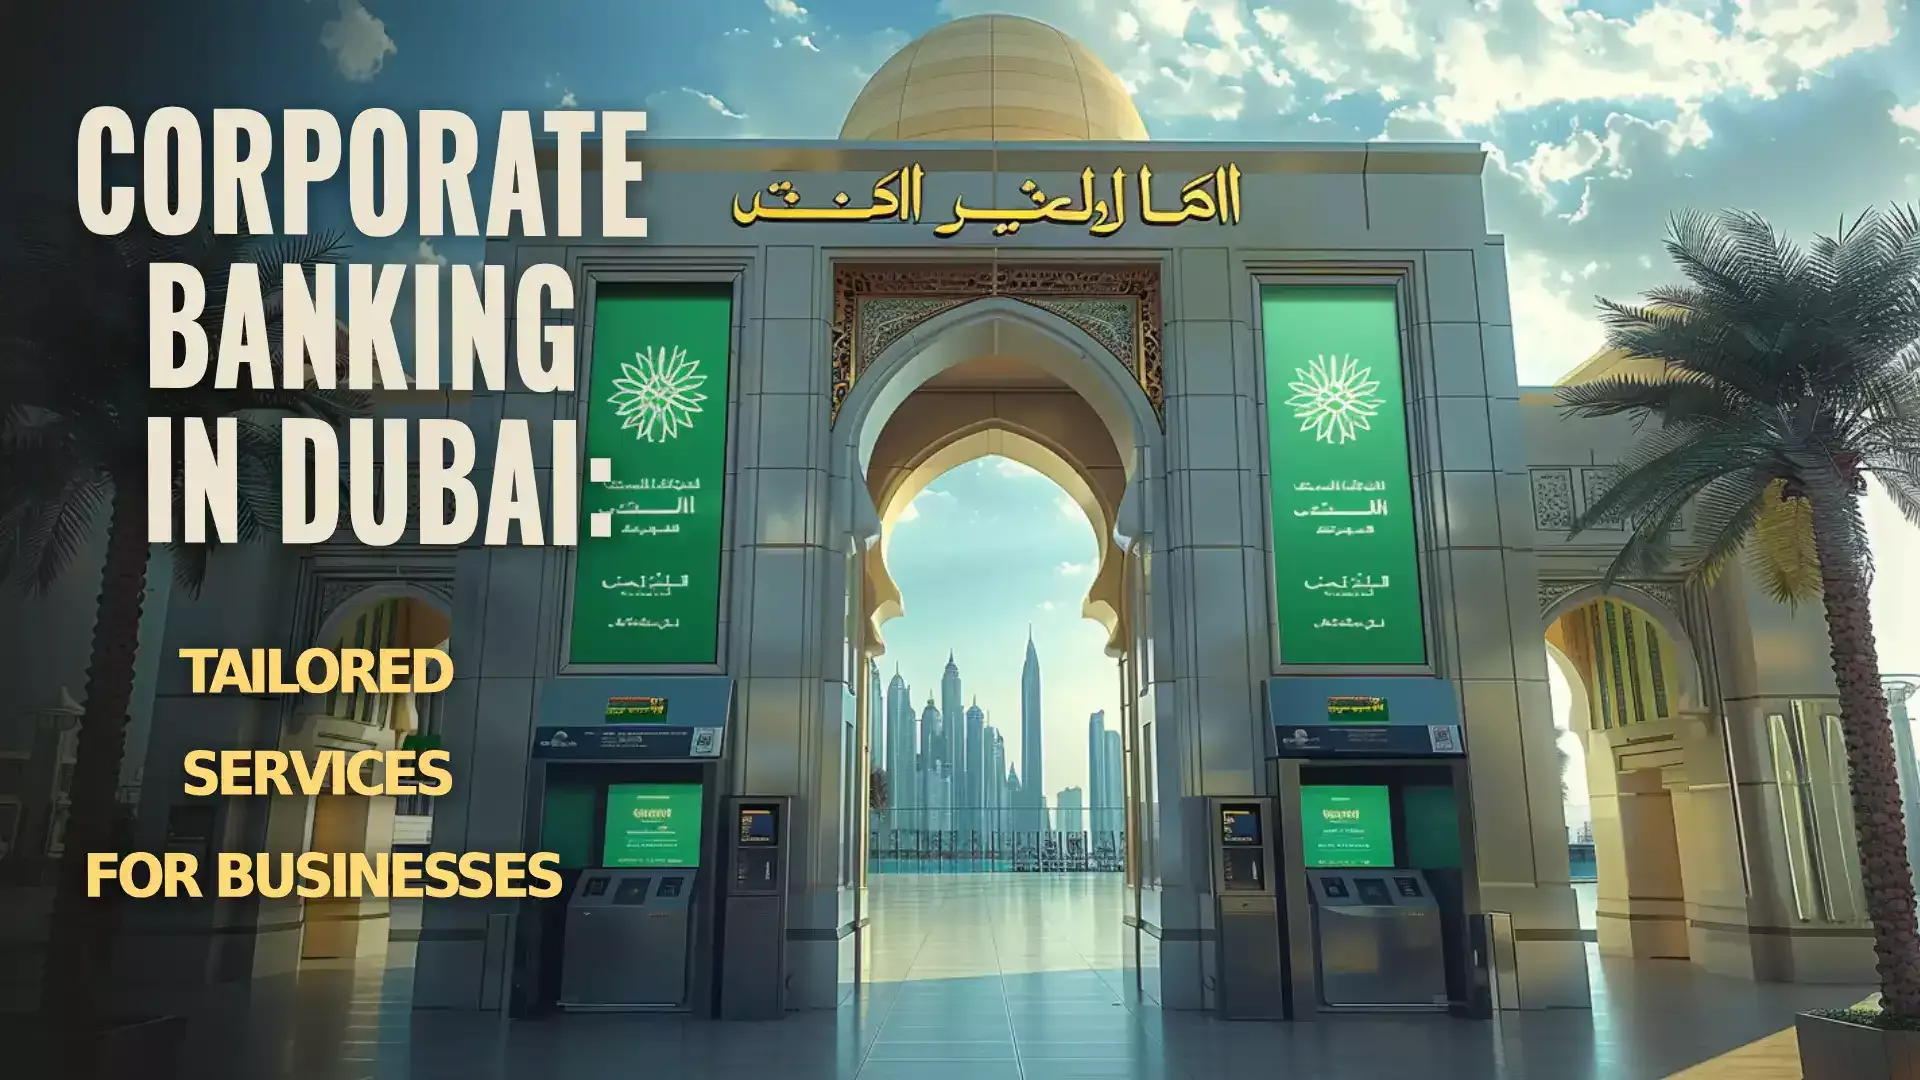 Image representing the prominence of corporate banking in Dubai's financial sector